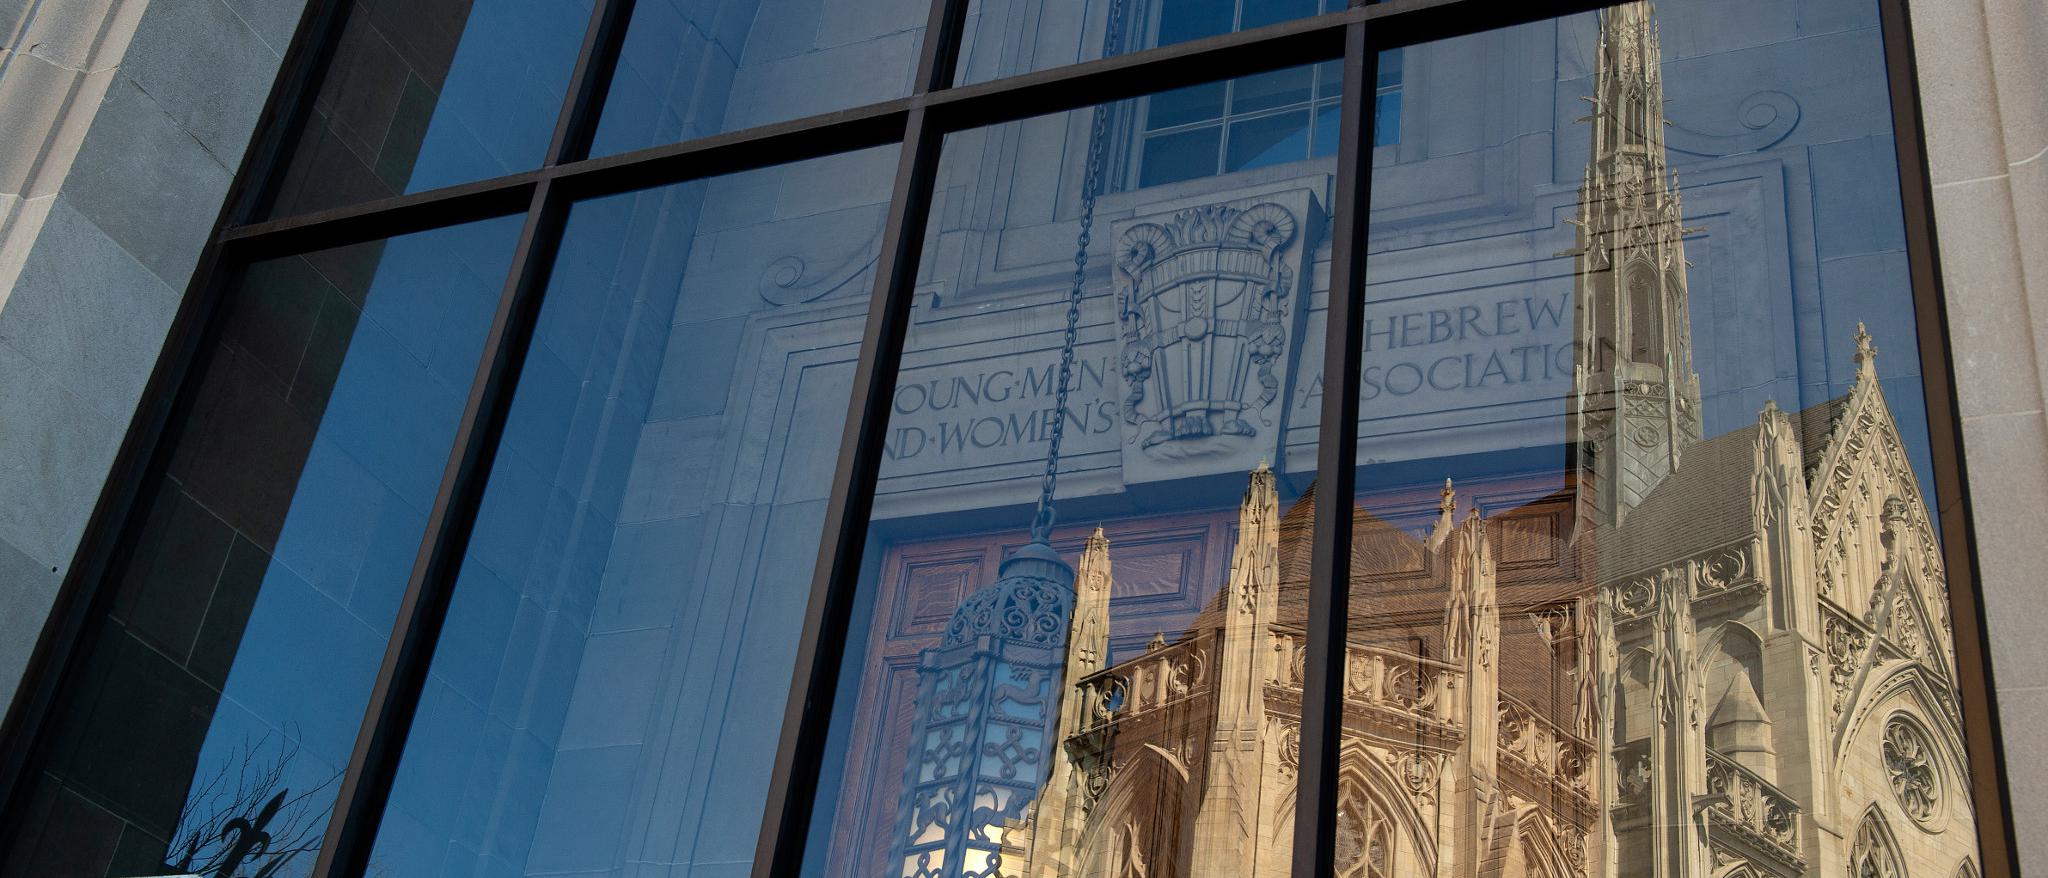 reflection of the Cathedral of Learning in a window